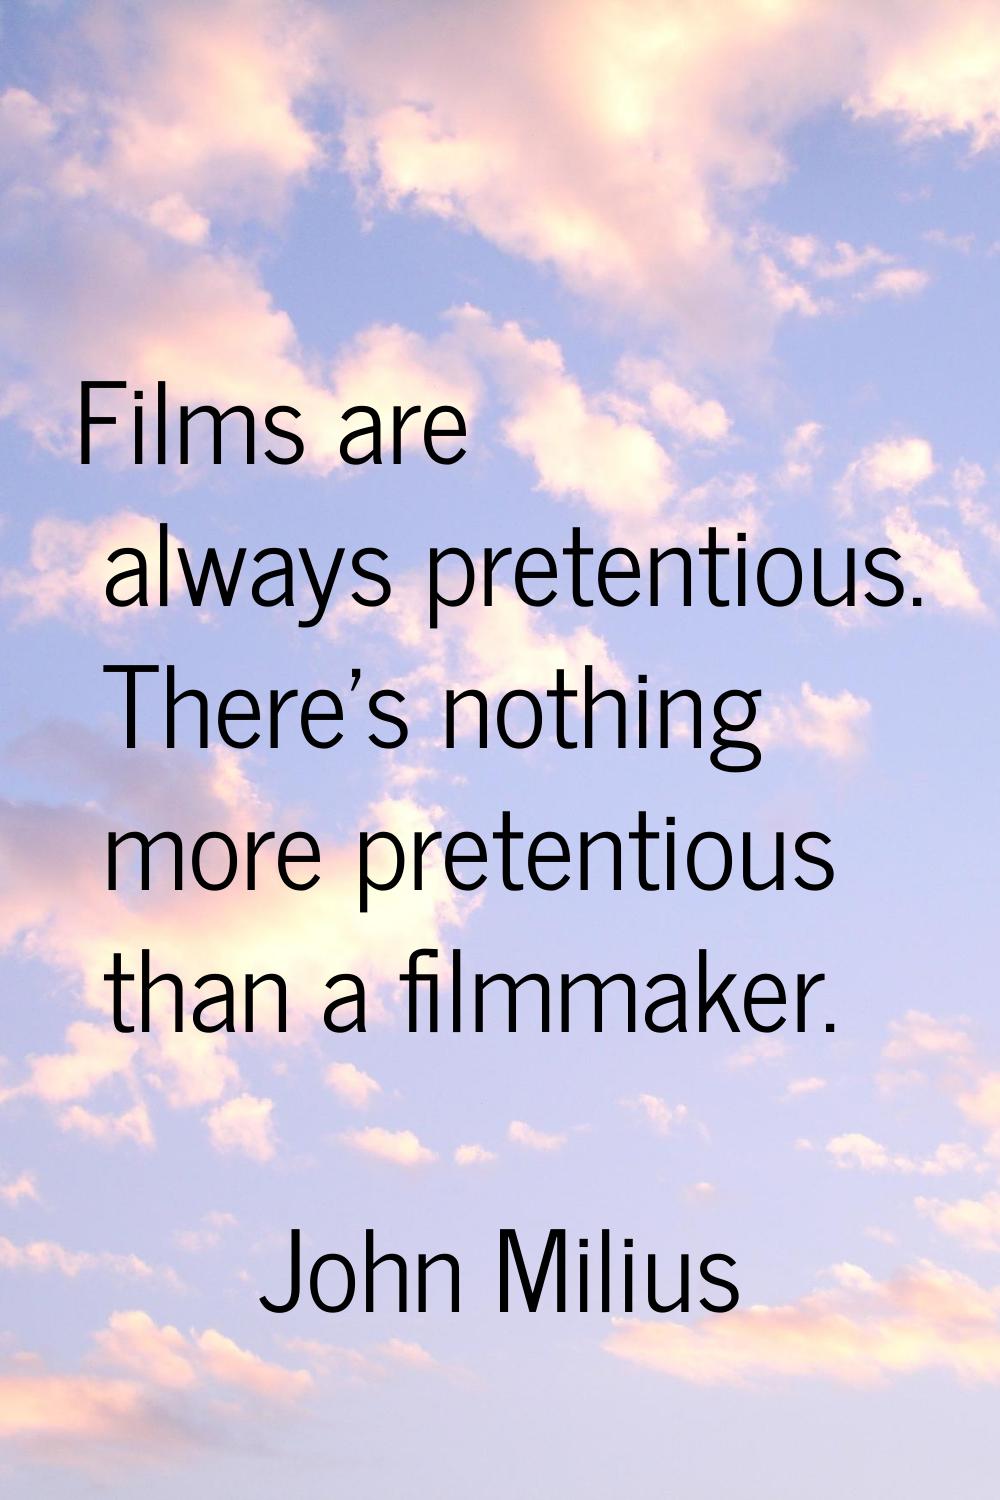 Films are always pretentious. There's nothing more pretentious than a filmmaker.